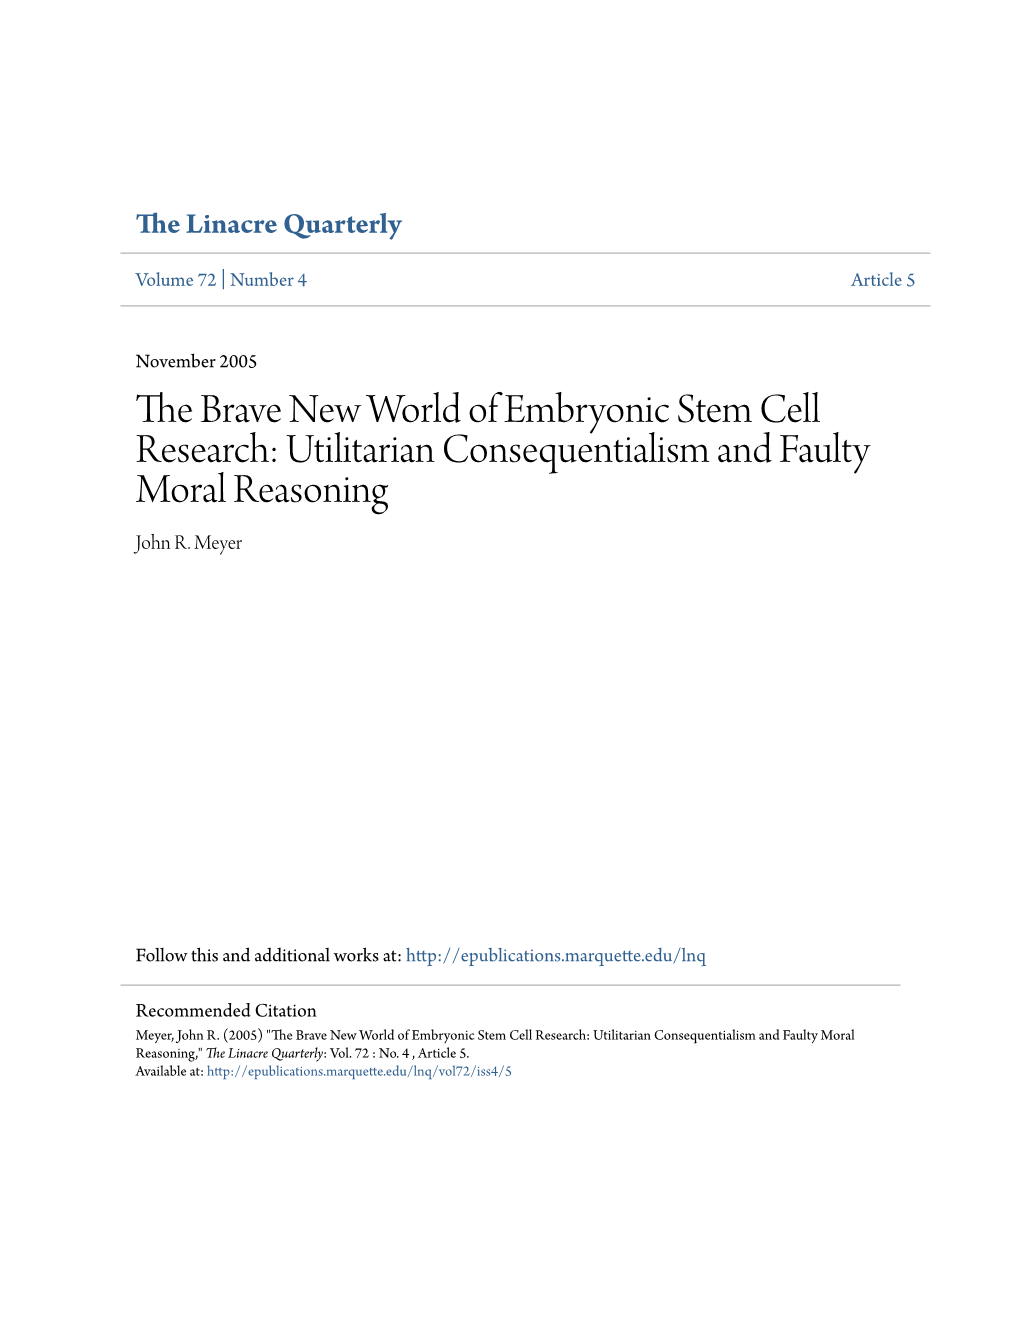 The Brave New World of Embryonic Stem Cell Research: Utilitarian Consequentialism and Faulty Moral Reasoning